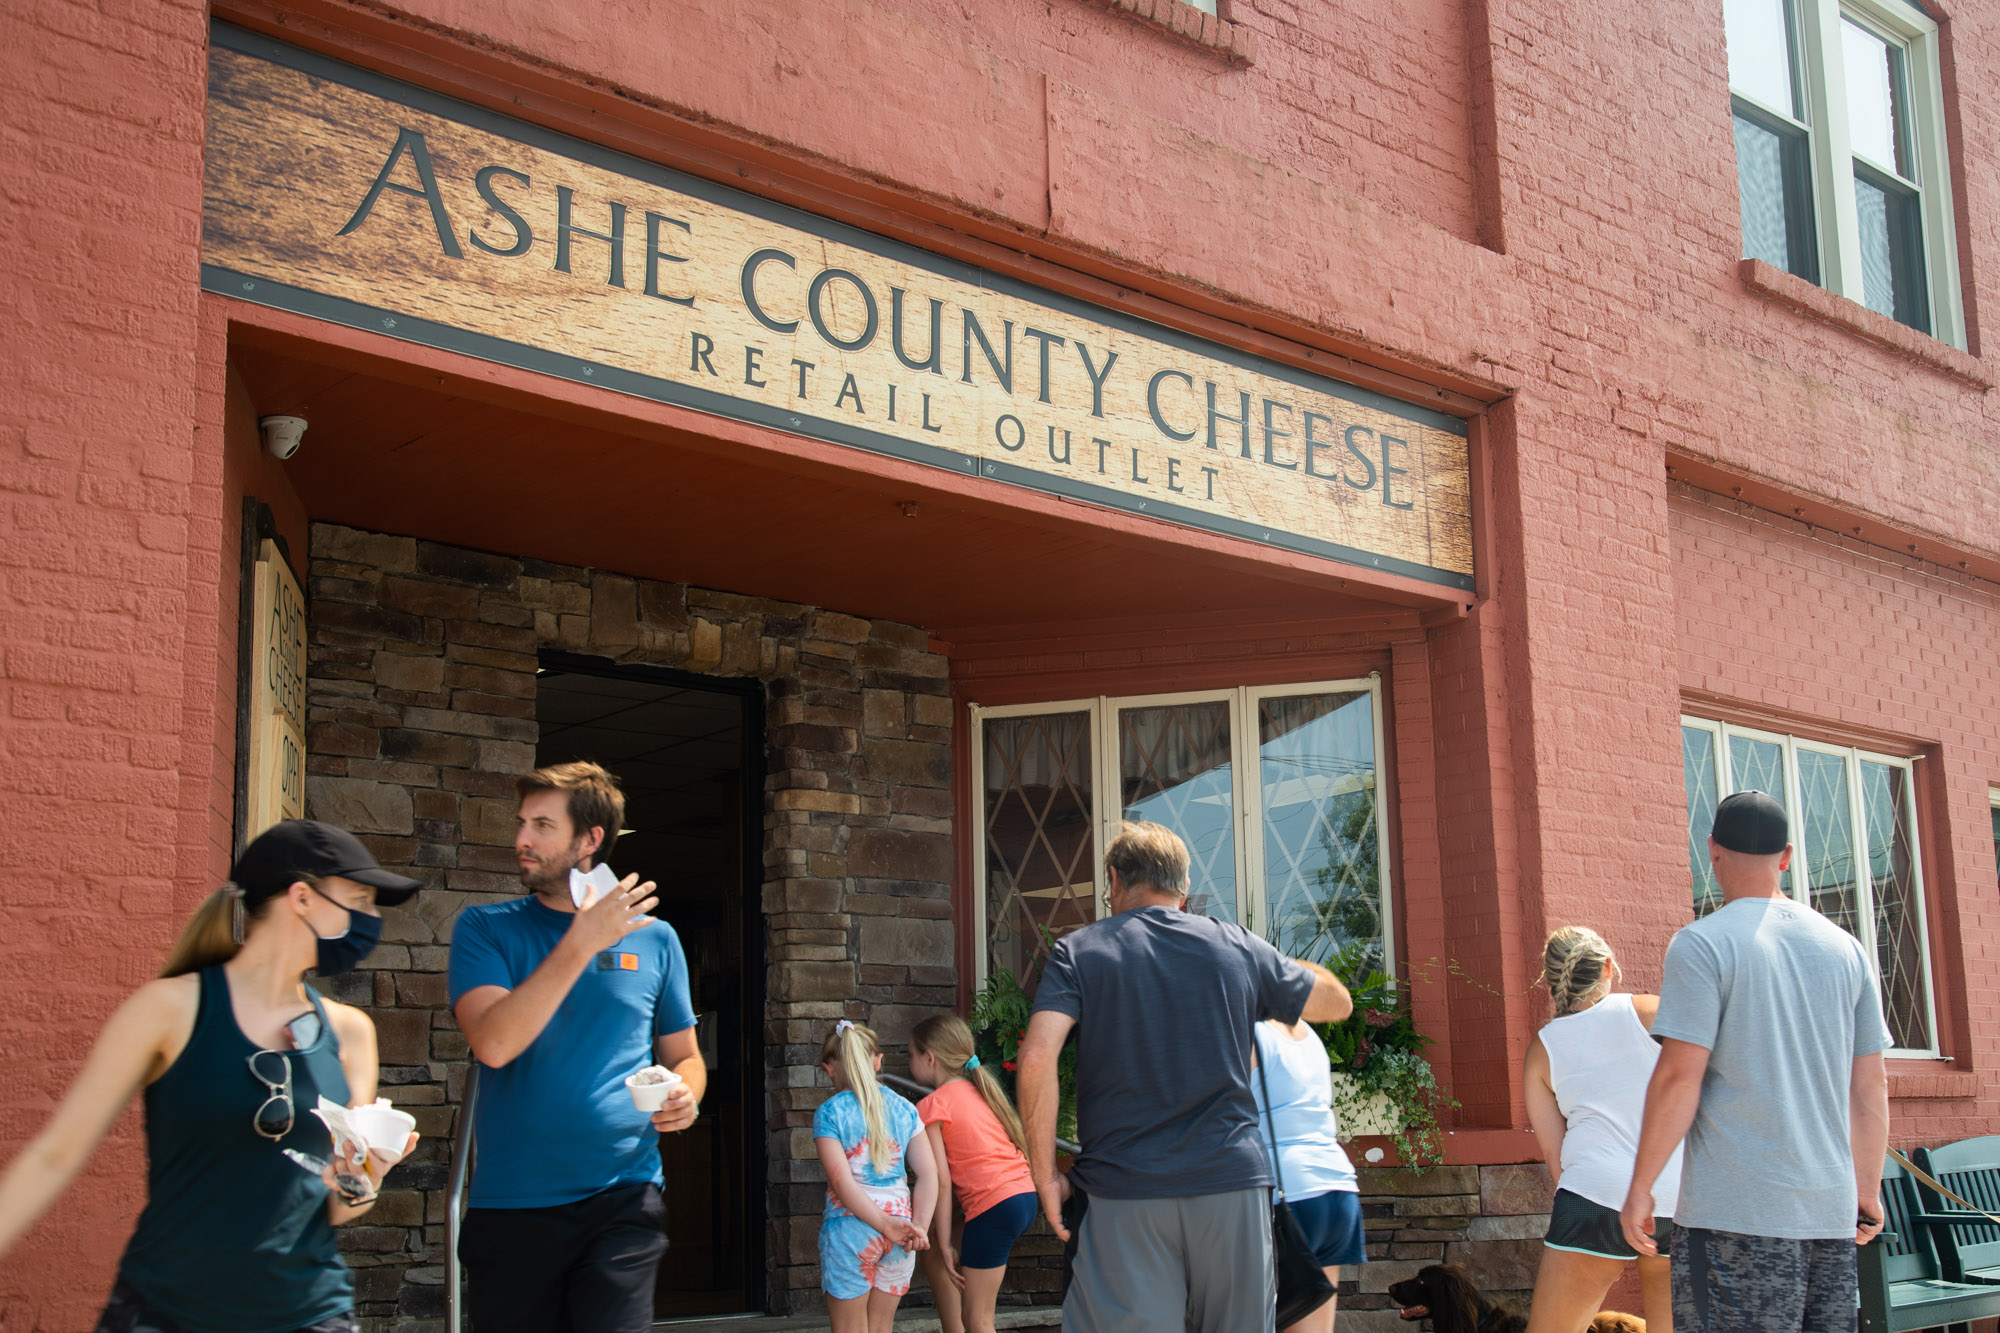 A group of customers flock in and out of a store called "Ashe County Cheese"